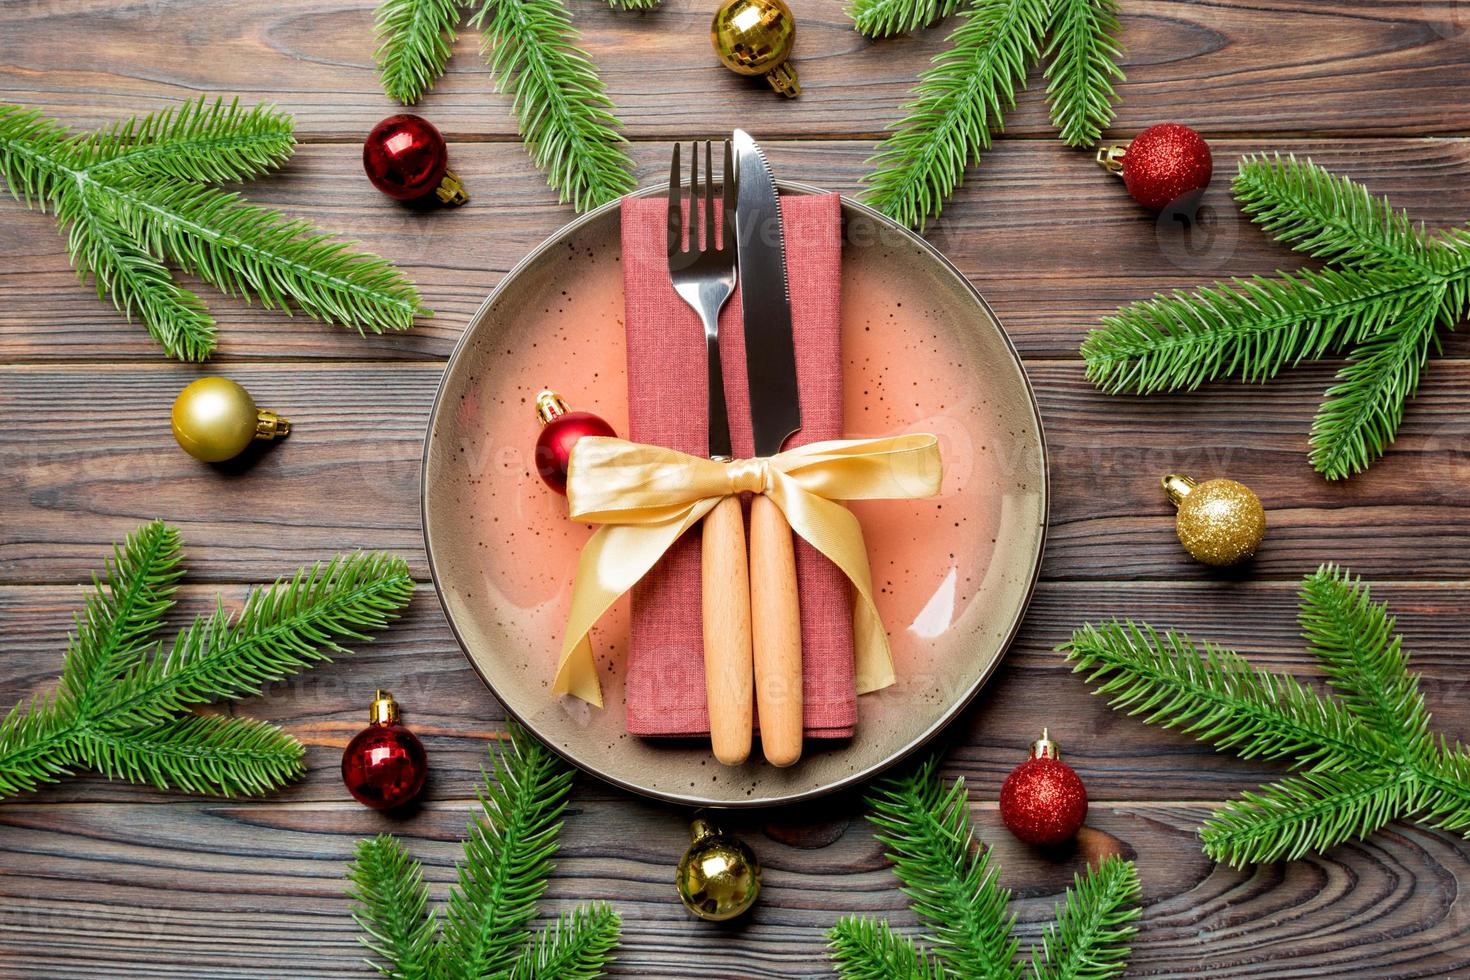 Top view of New Year dinner on festive wooden background. Composition of plate, fork, knife, fir tree and decorations. Merry Christmas concept photo